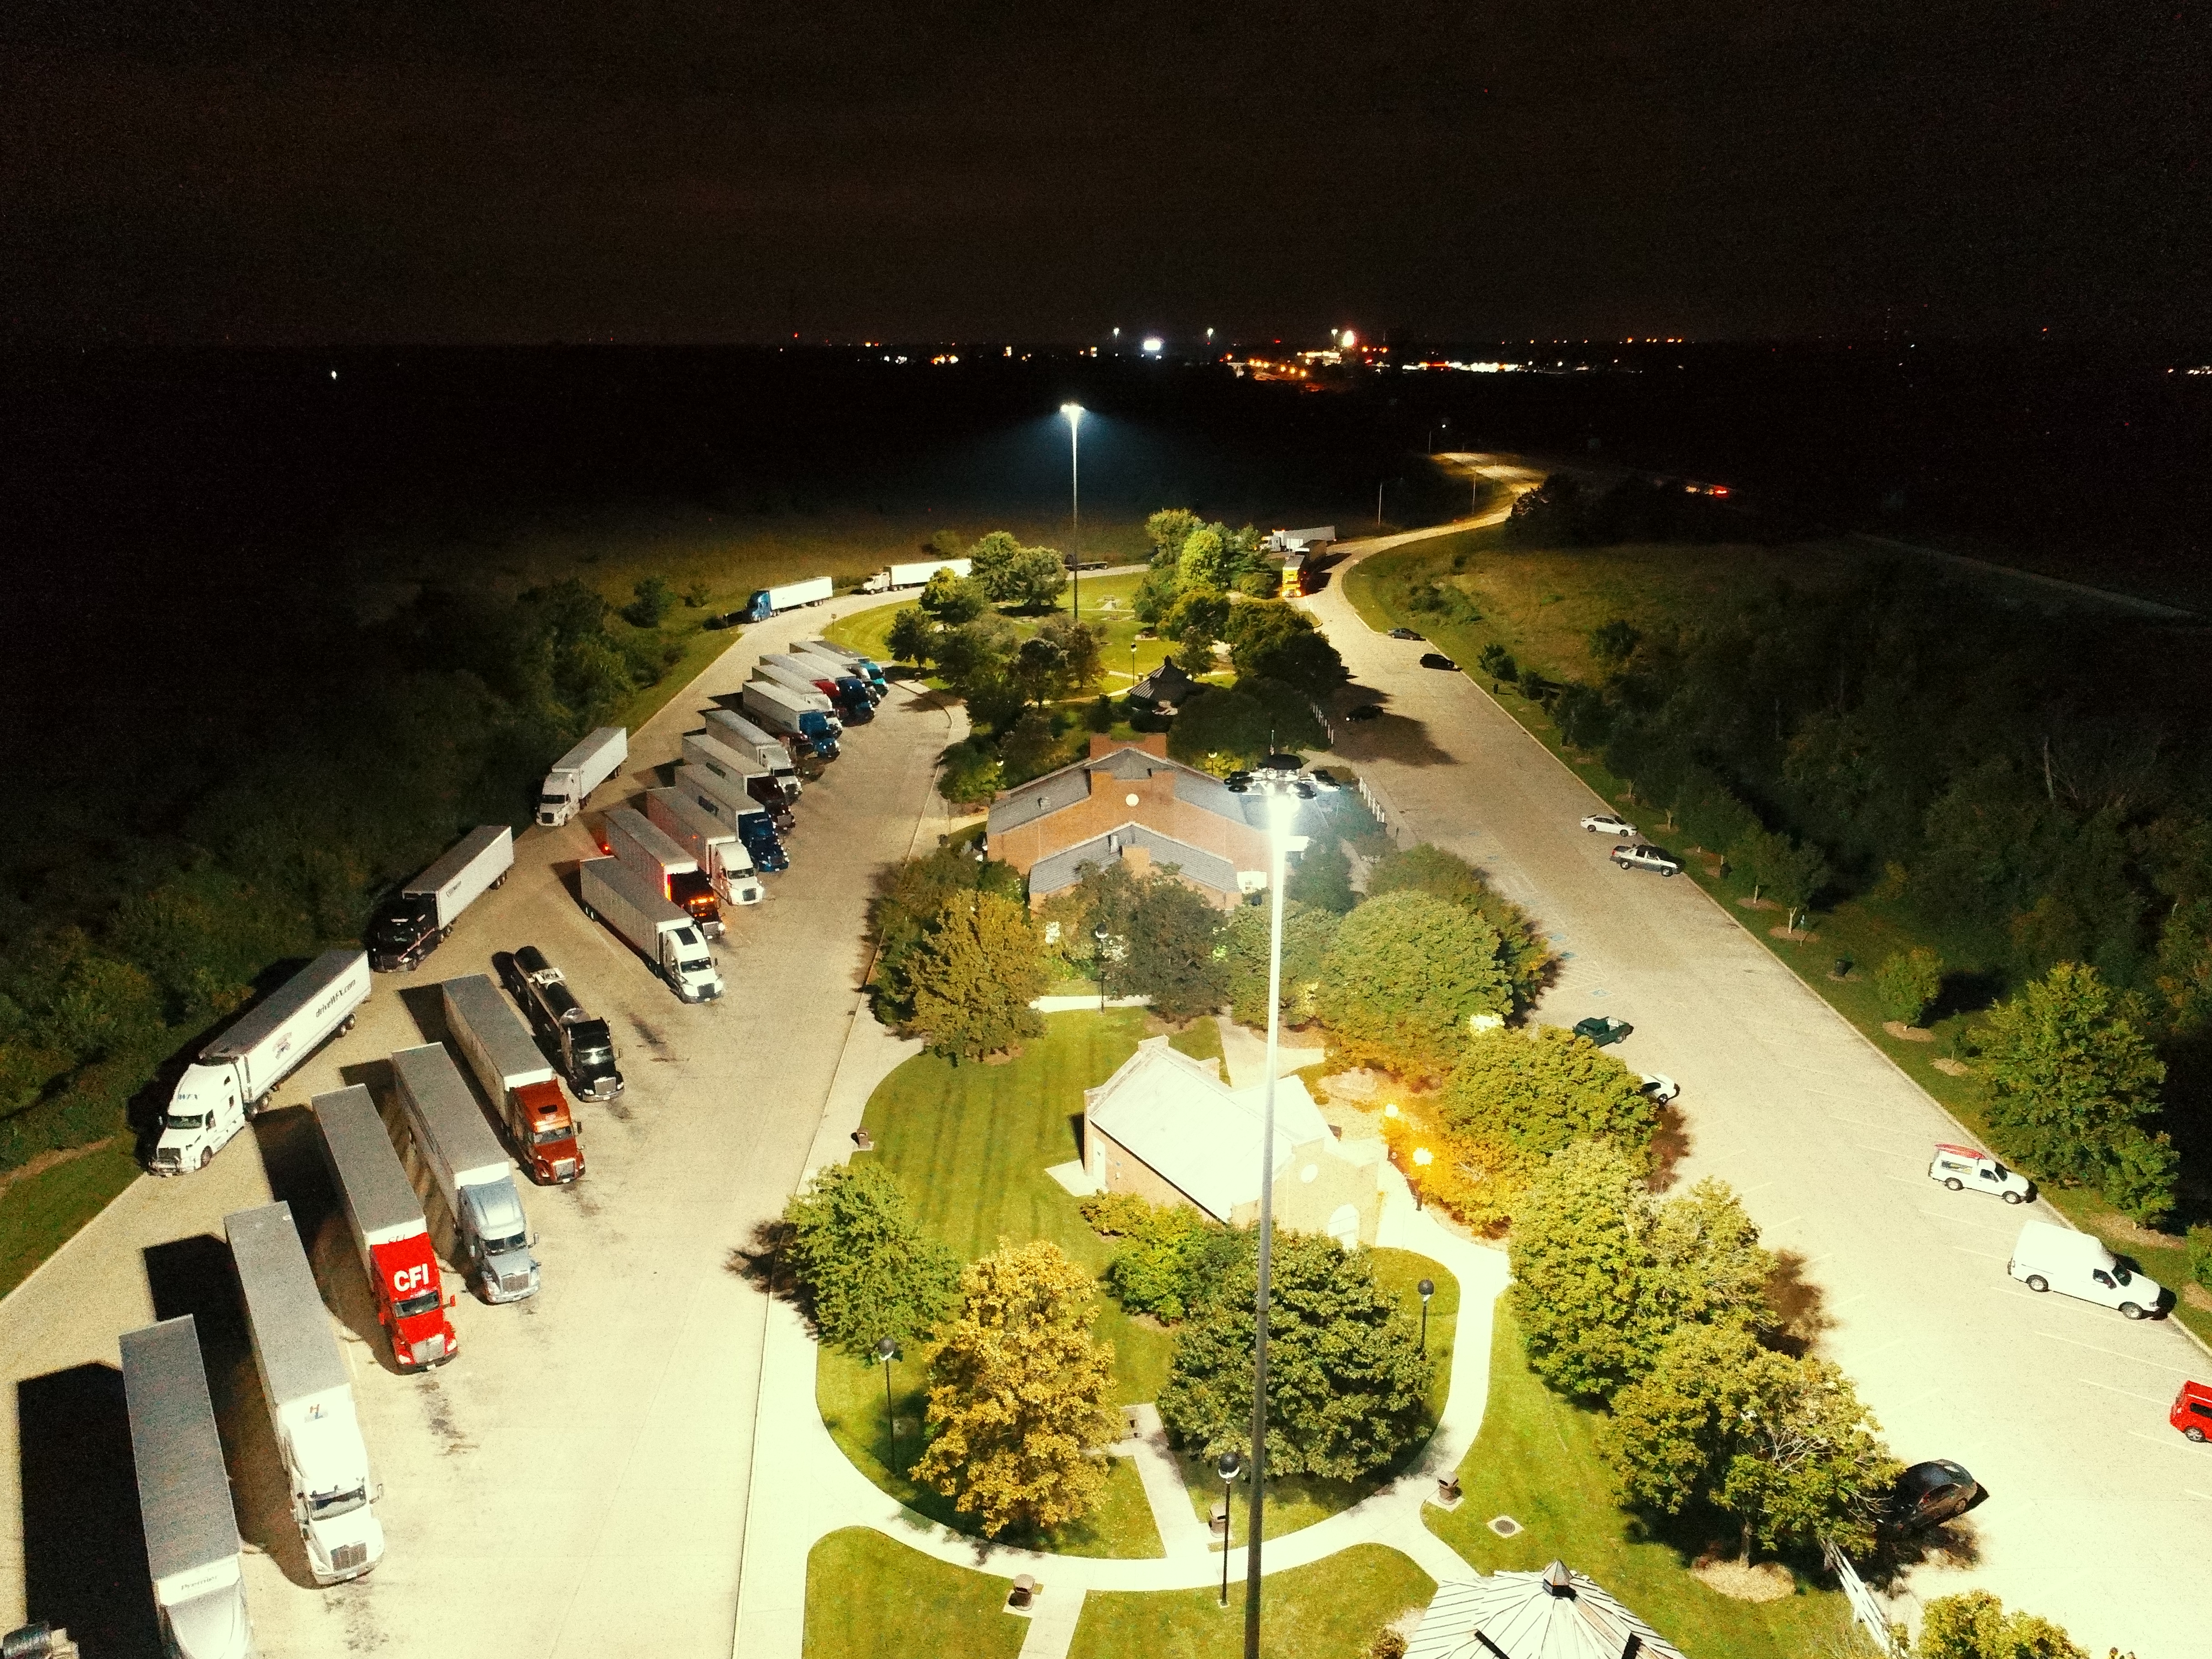 A rest area in Kentucky with a full lot of semi trucks parked for the evening